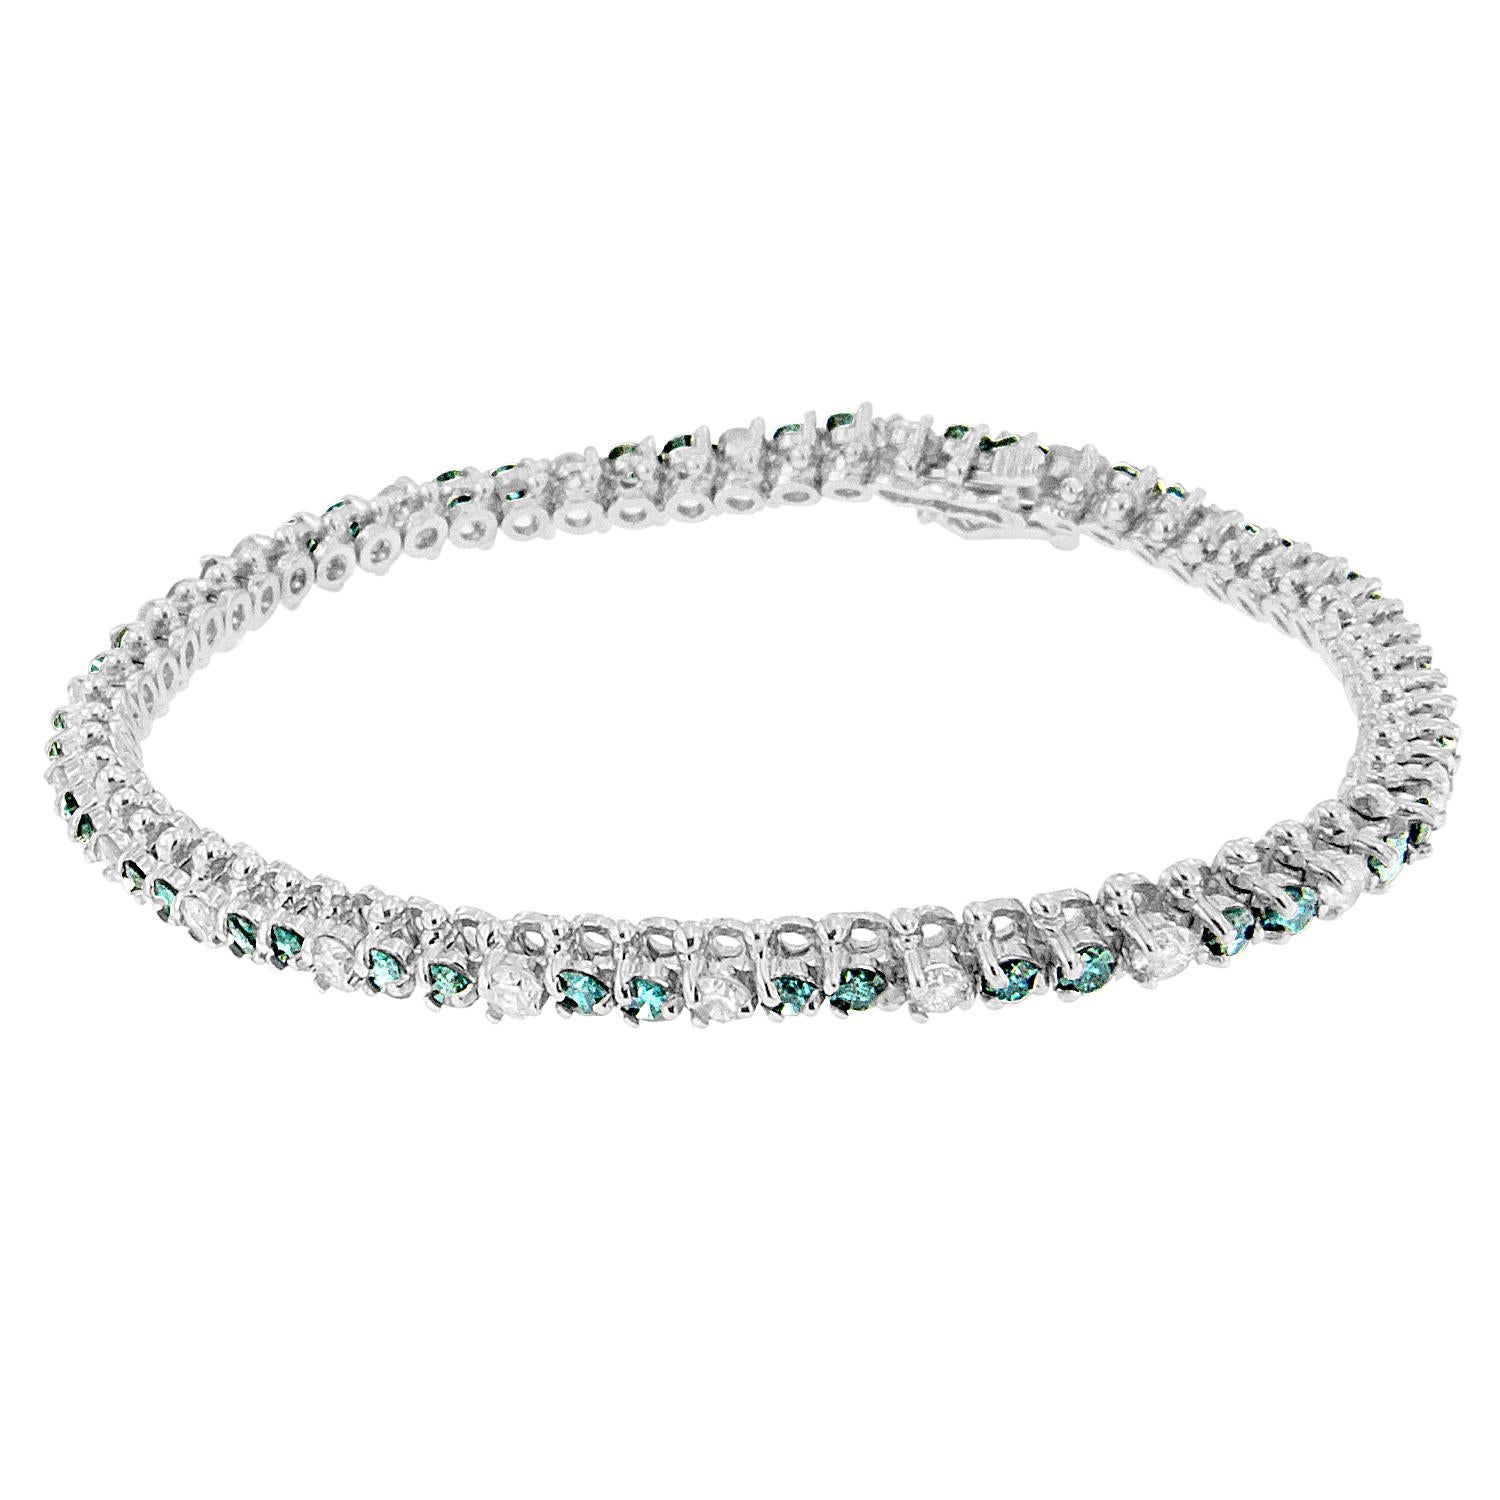 This beautiful 14 karat white gold bracelet has 4 5/8 carat round and treated blue colored shaped diamonds set up in the channel form giving it a classy look. This definitely makes for an exciting gift for that special one! Bracelet has 66 natural,